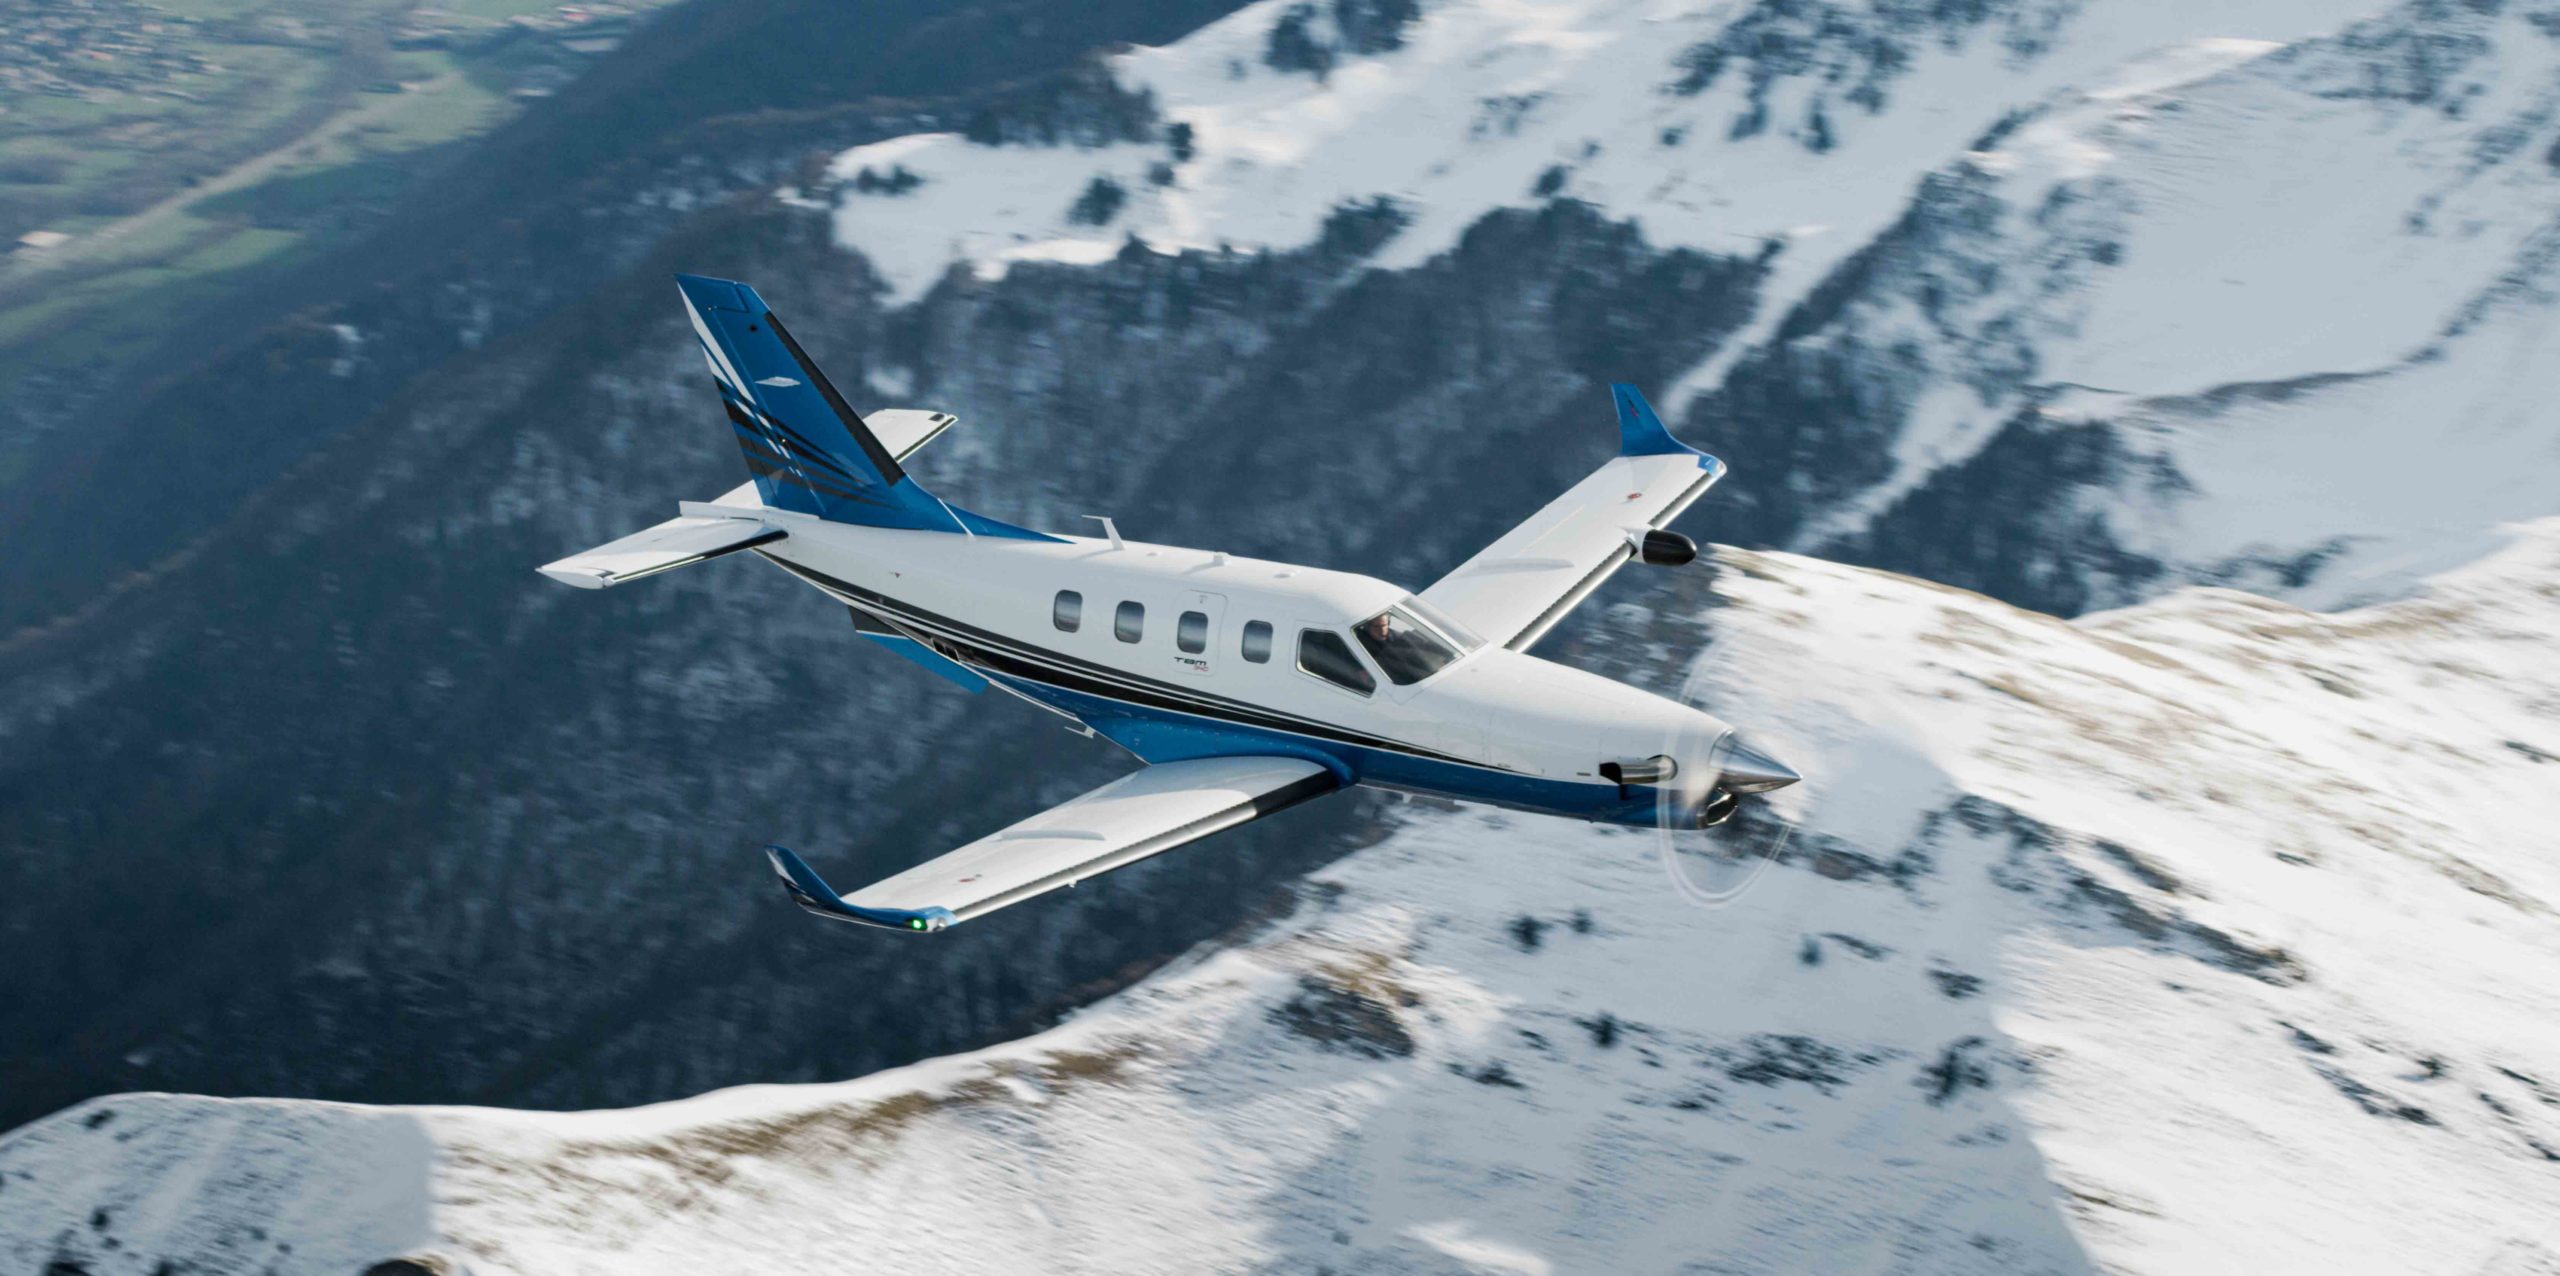 Daher TBM 940 aircraft flying over mountains